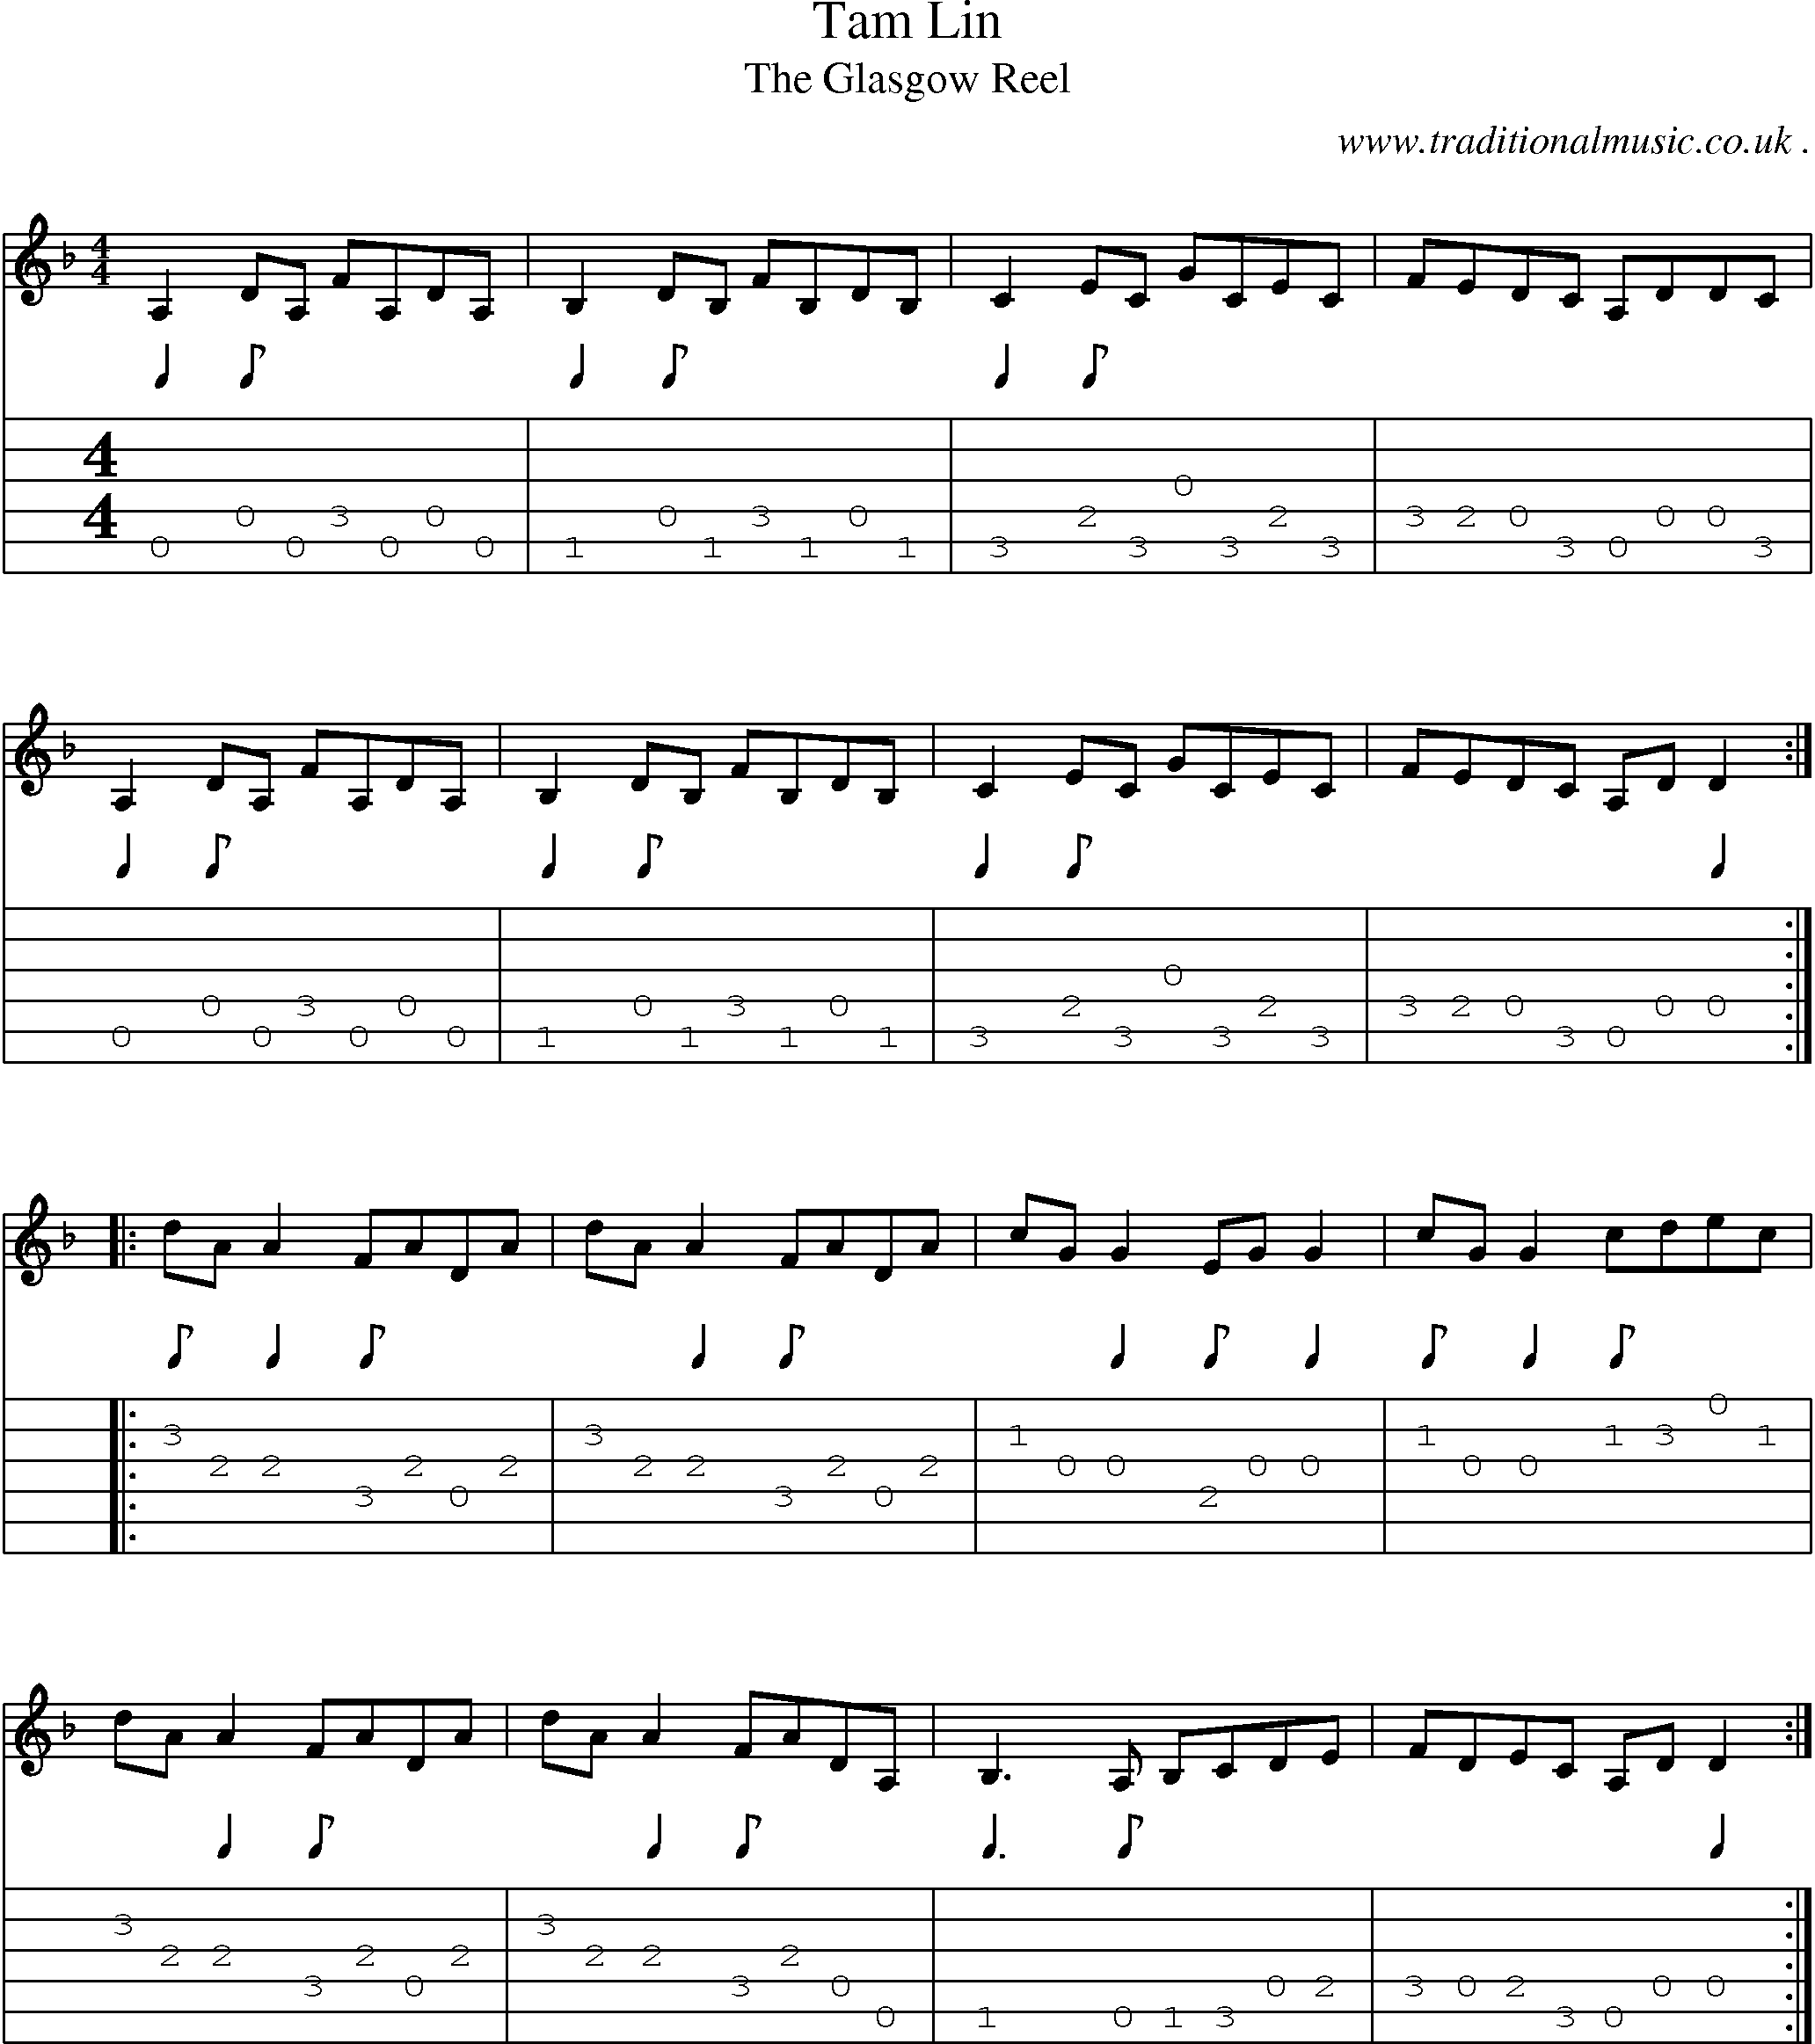 Sheet-Music and Guitar Tabs for Tam Lin